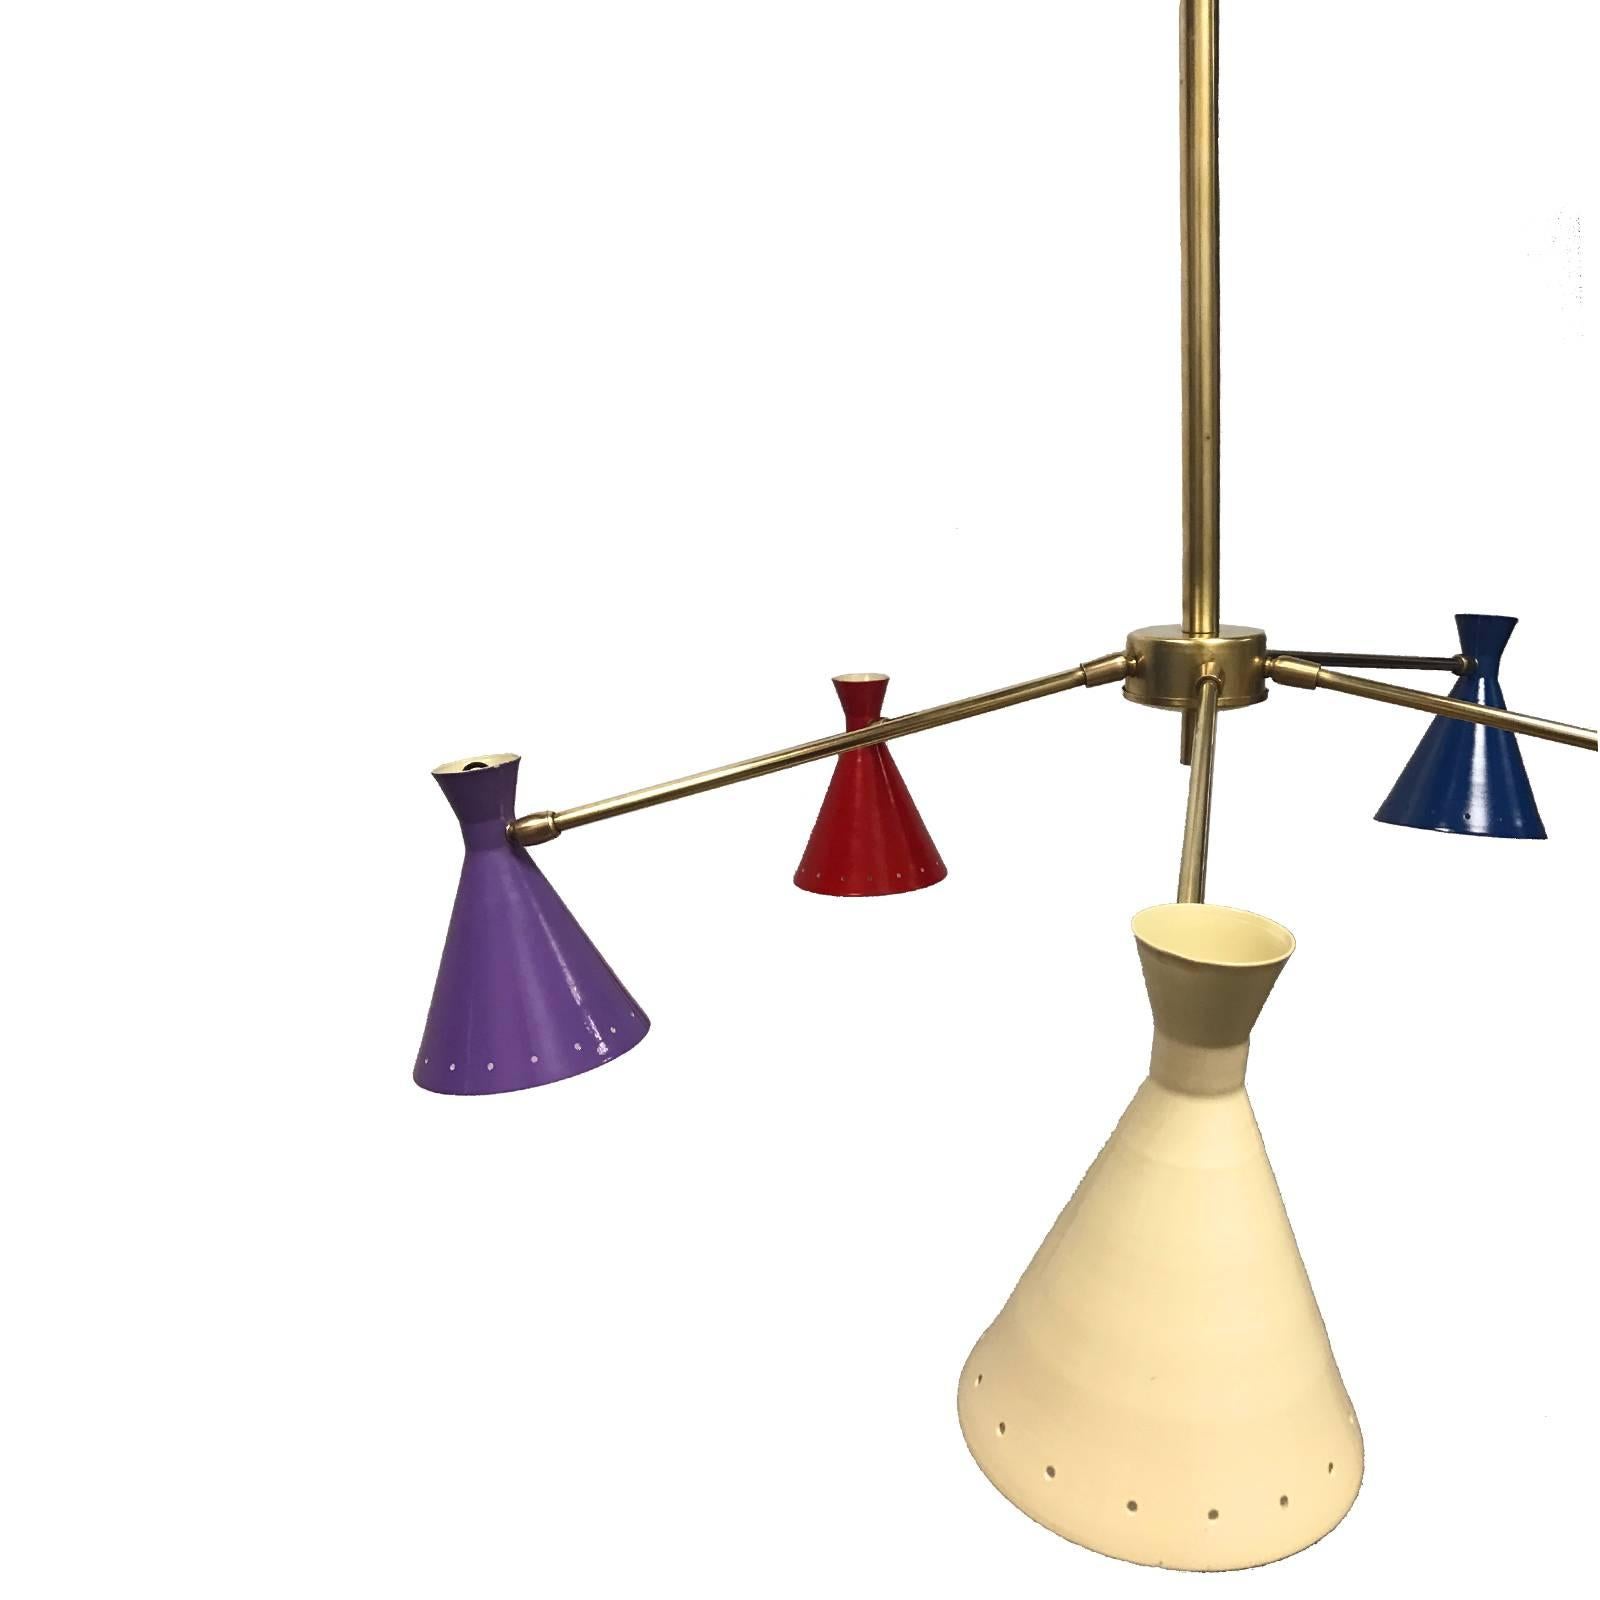 Italian Arteluce 'Monolith' brass and aluminium chandelier with adjustable tole shades. Brass and metal shades have been restored. Colorful and very elegant piece.